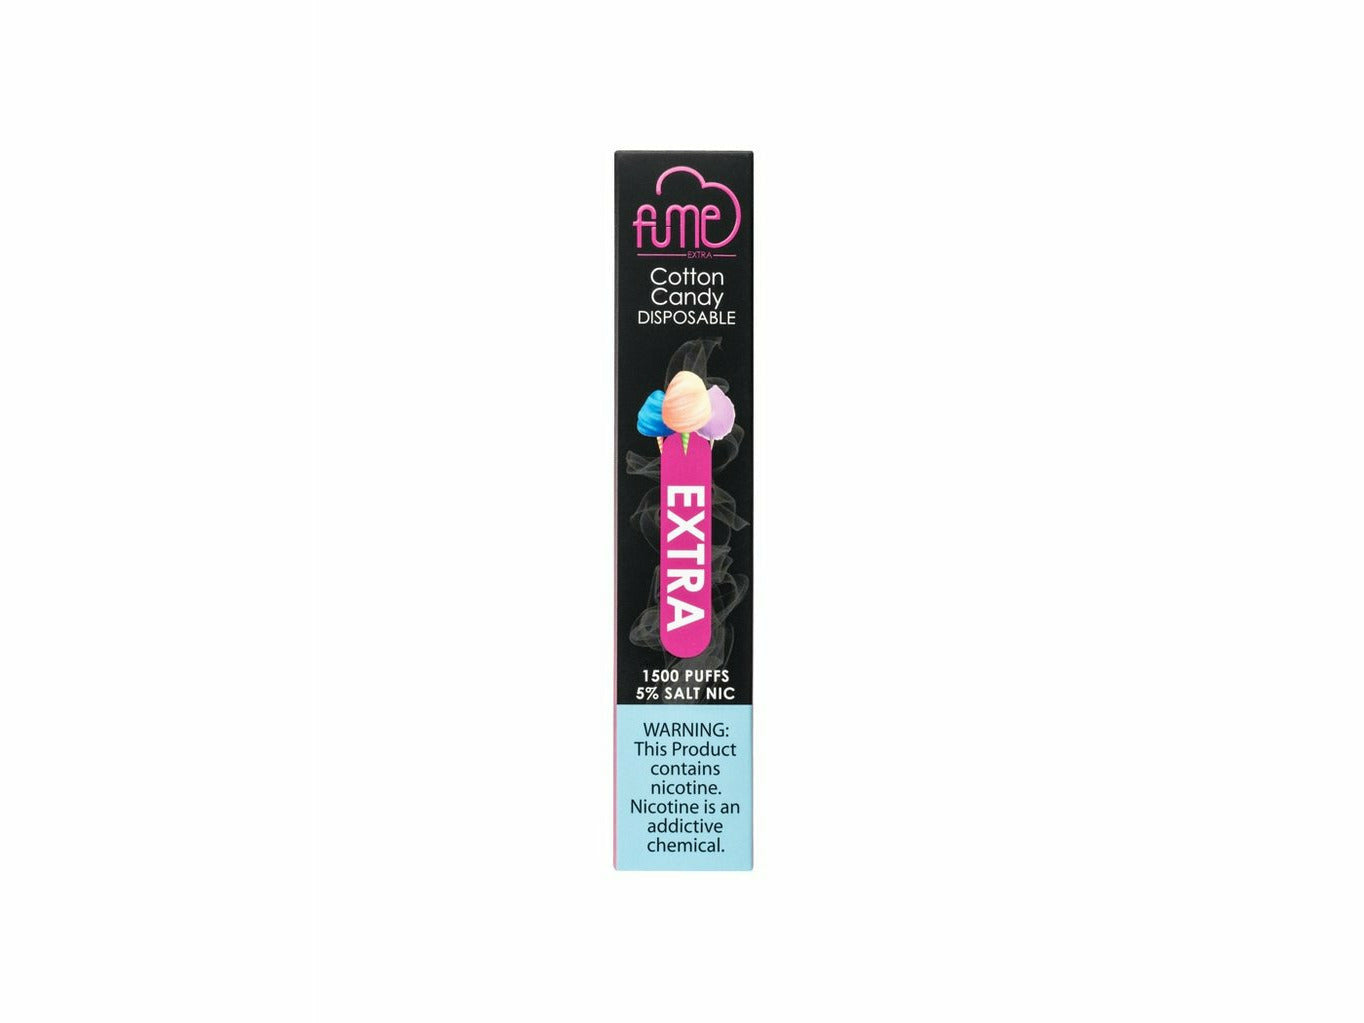 Cotton Candy Fume Extra 1500 puffs